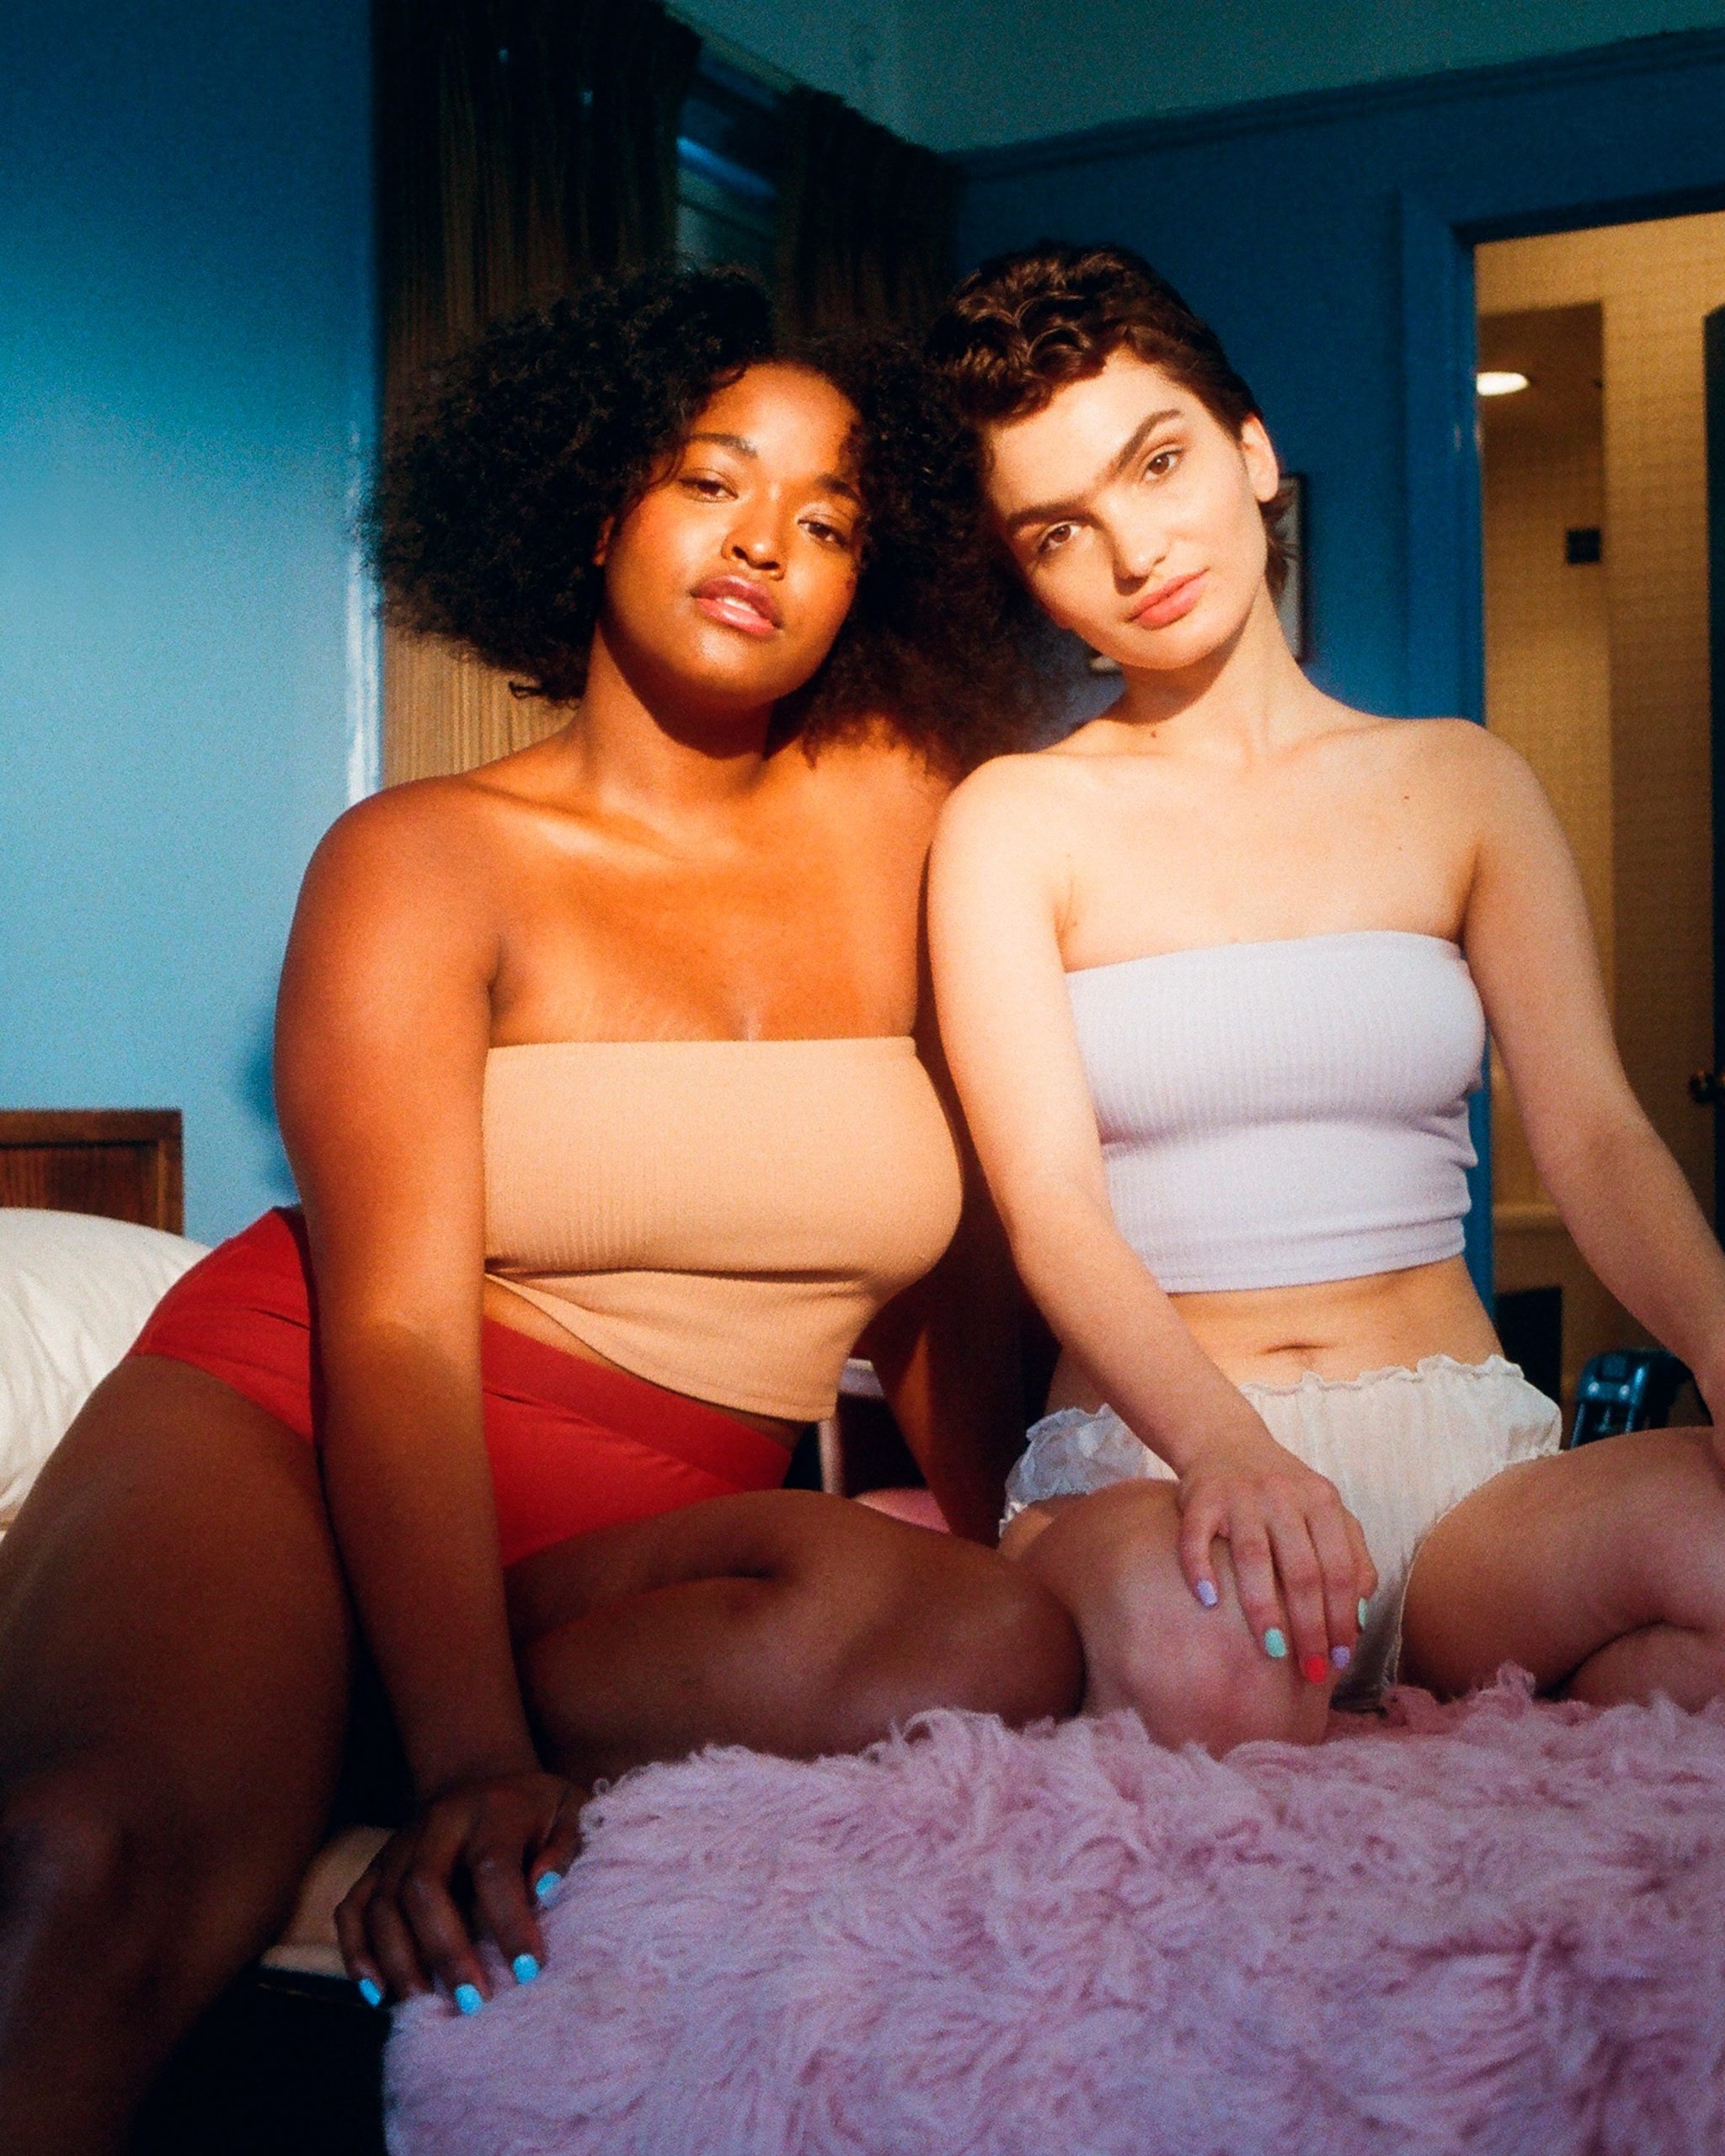 two women in swimwear sitting on bed promoting positive body image